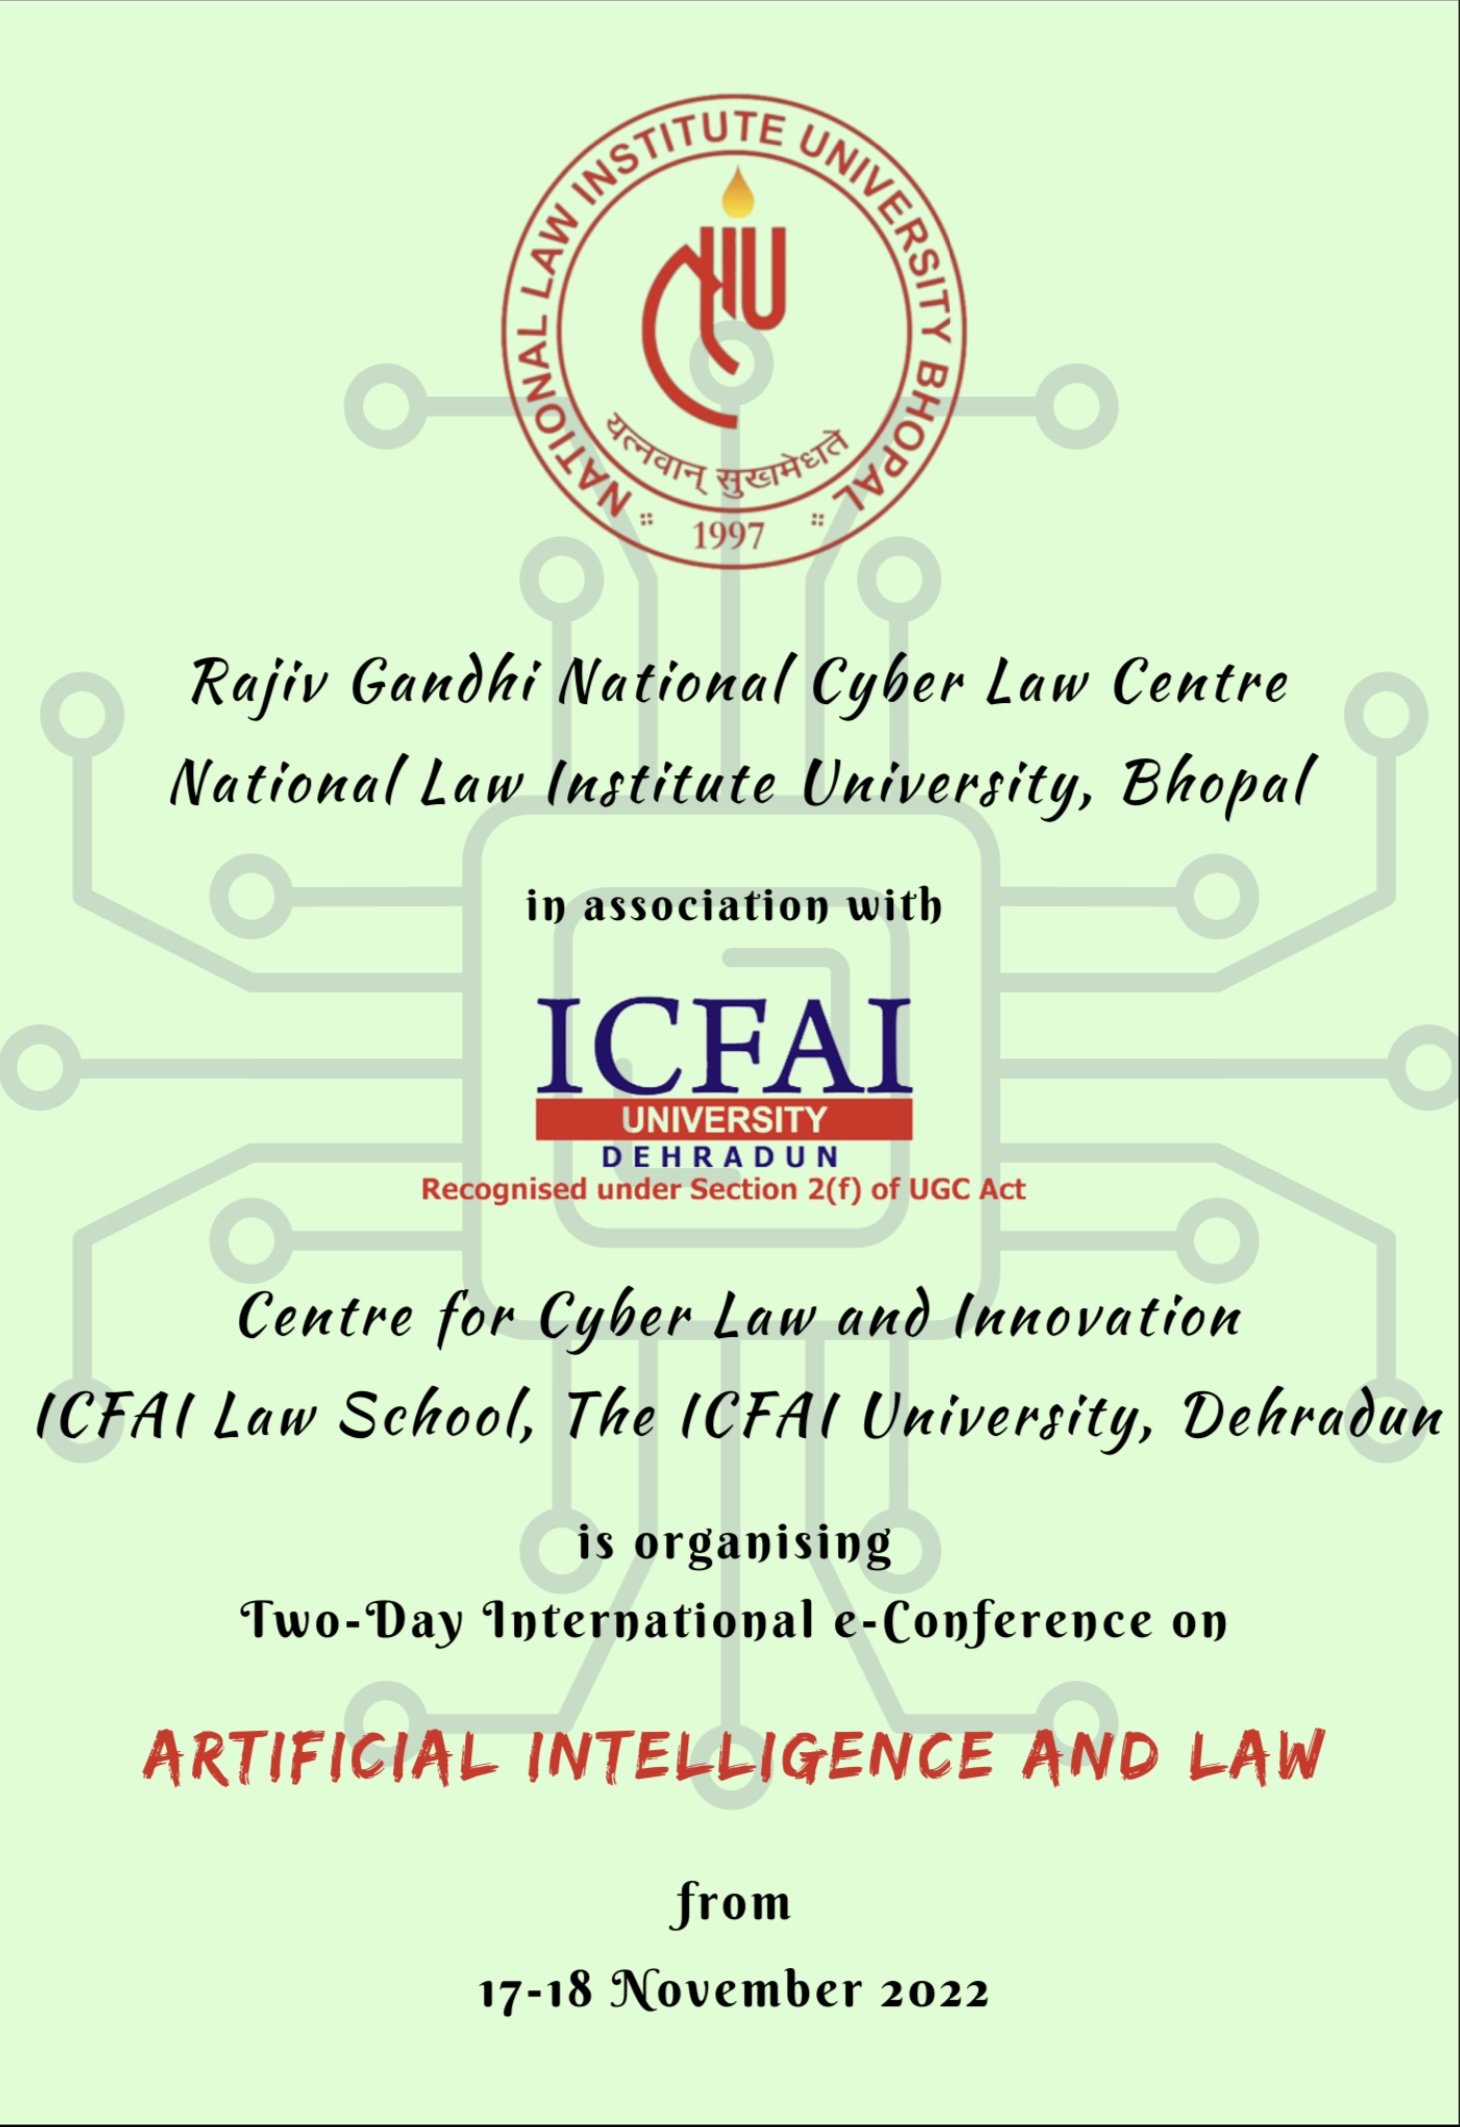 International e-conference on AI and Law by NLIU, Bhopal (17-18 November, 2022)